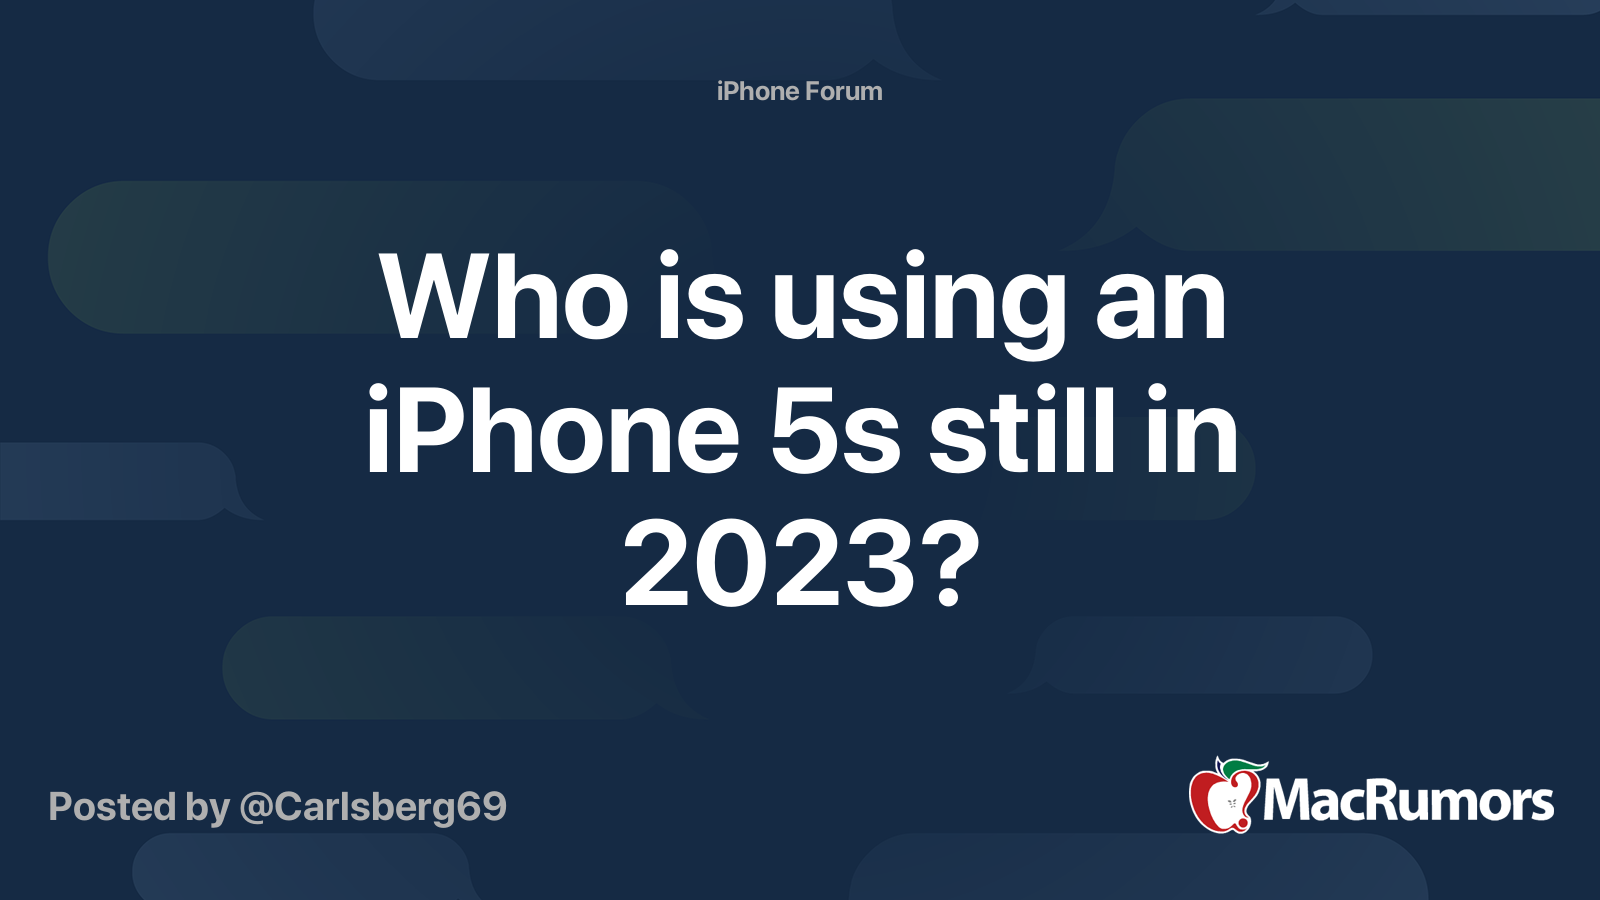 Who is using an iPhone 5s still in 2023?